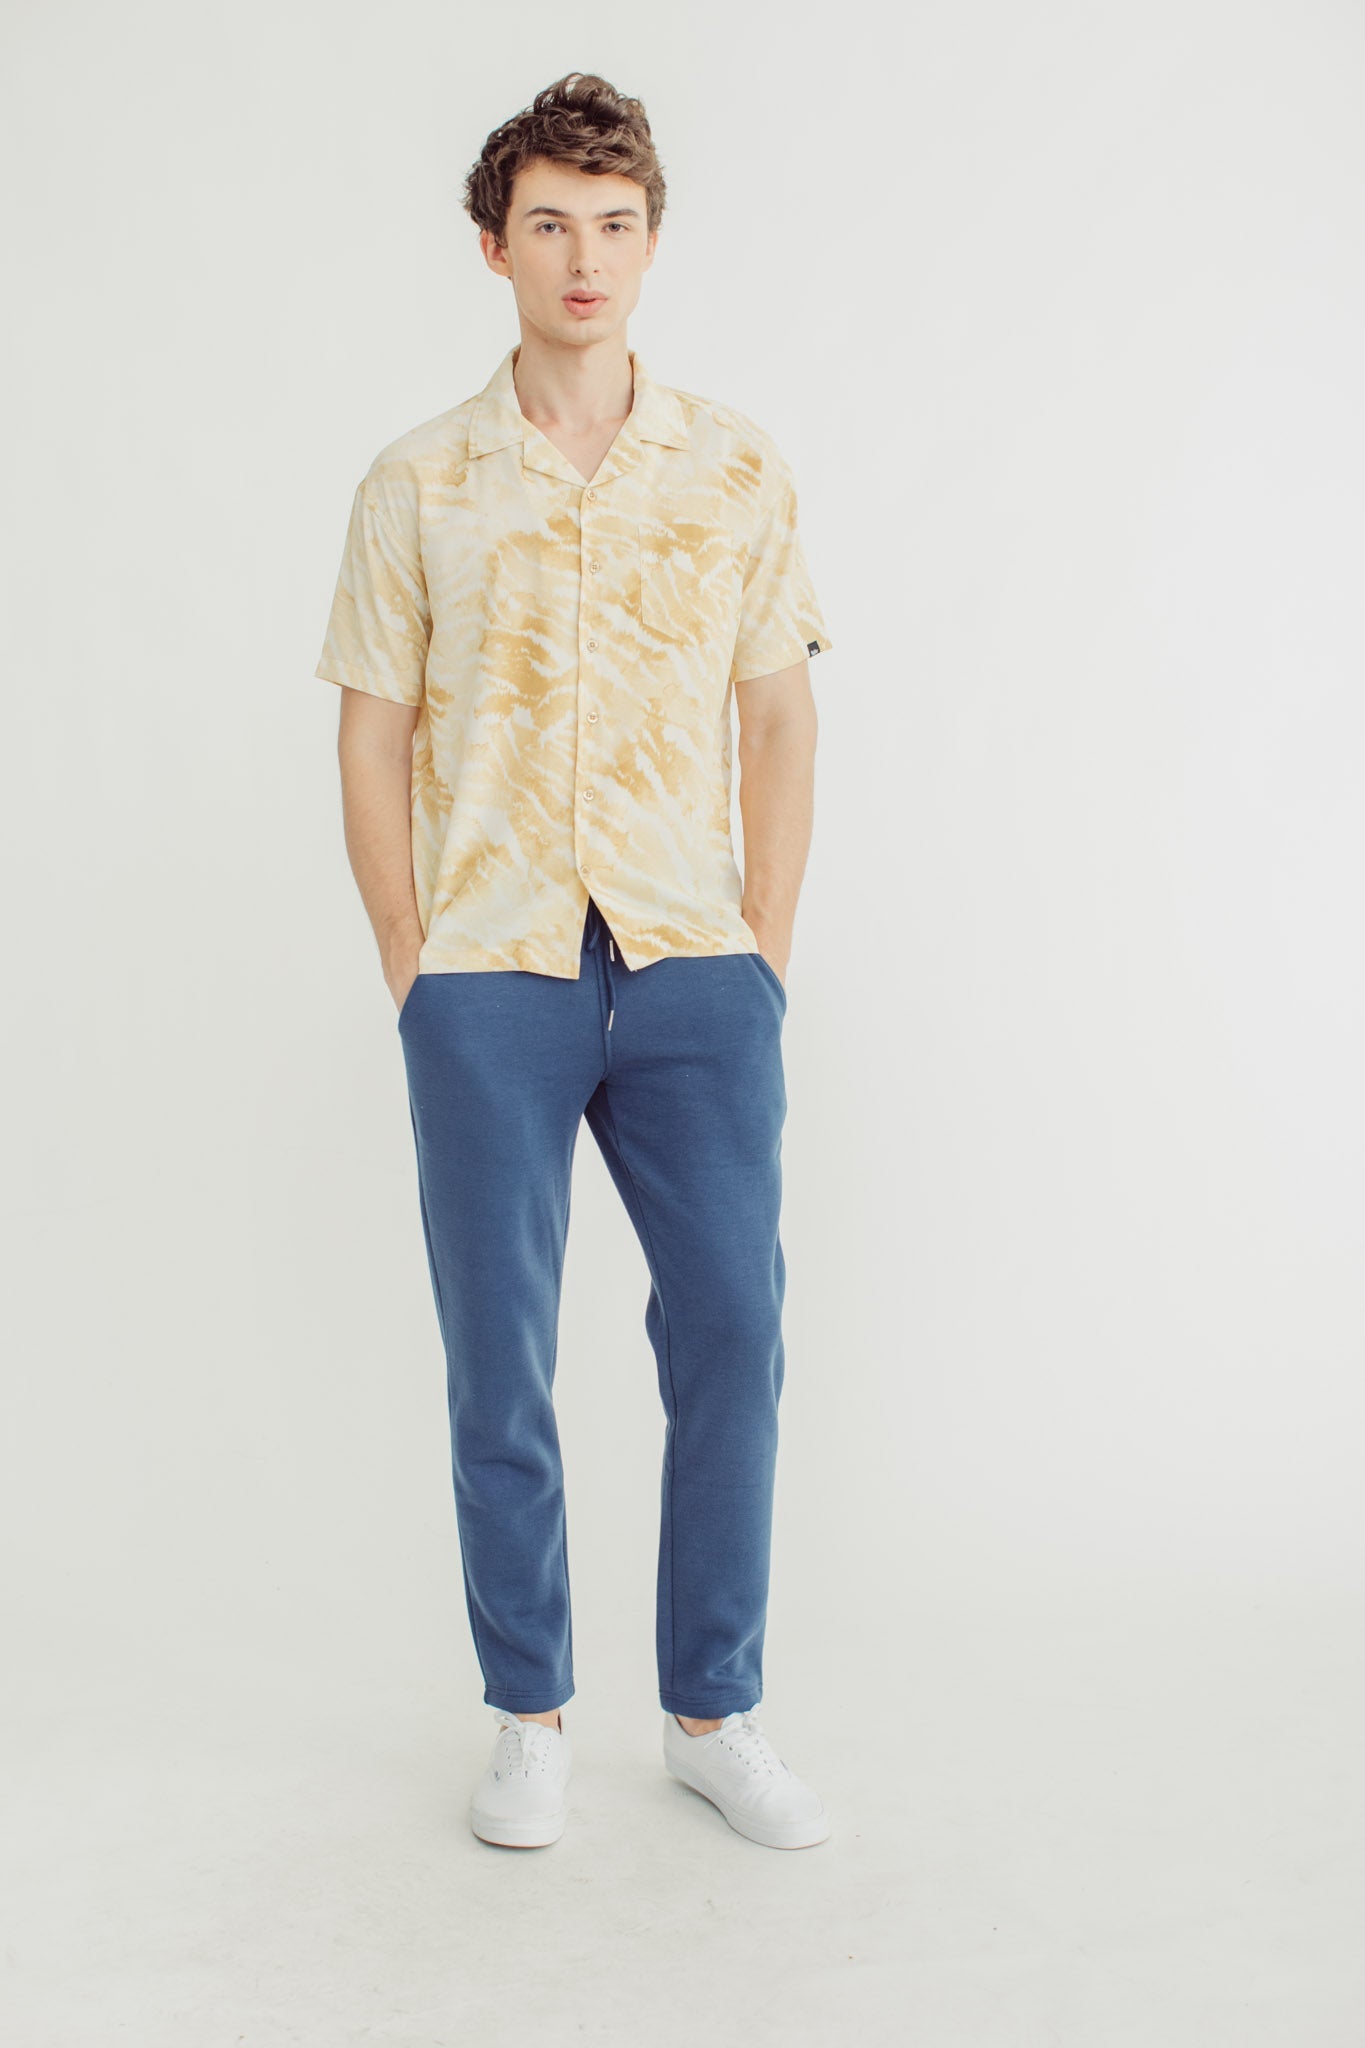 Jay Woven Short Sleeve Button Down with Pocket – Mossimo PH